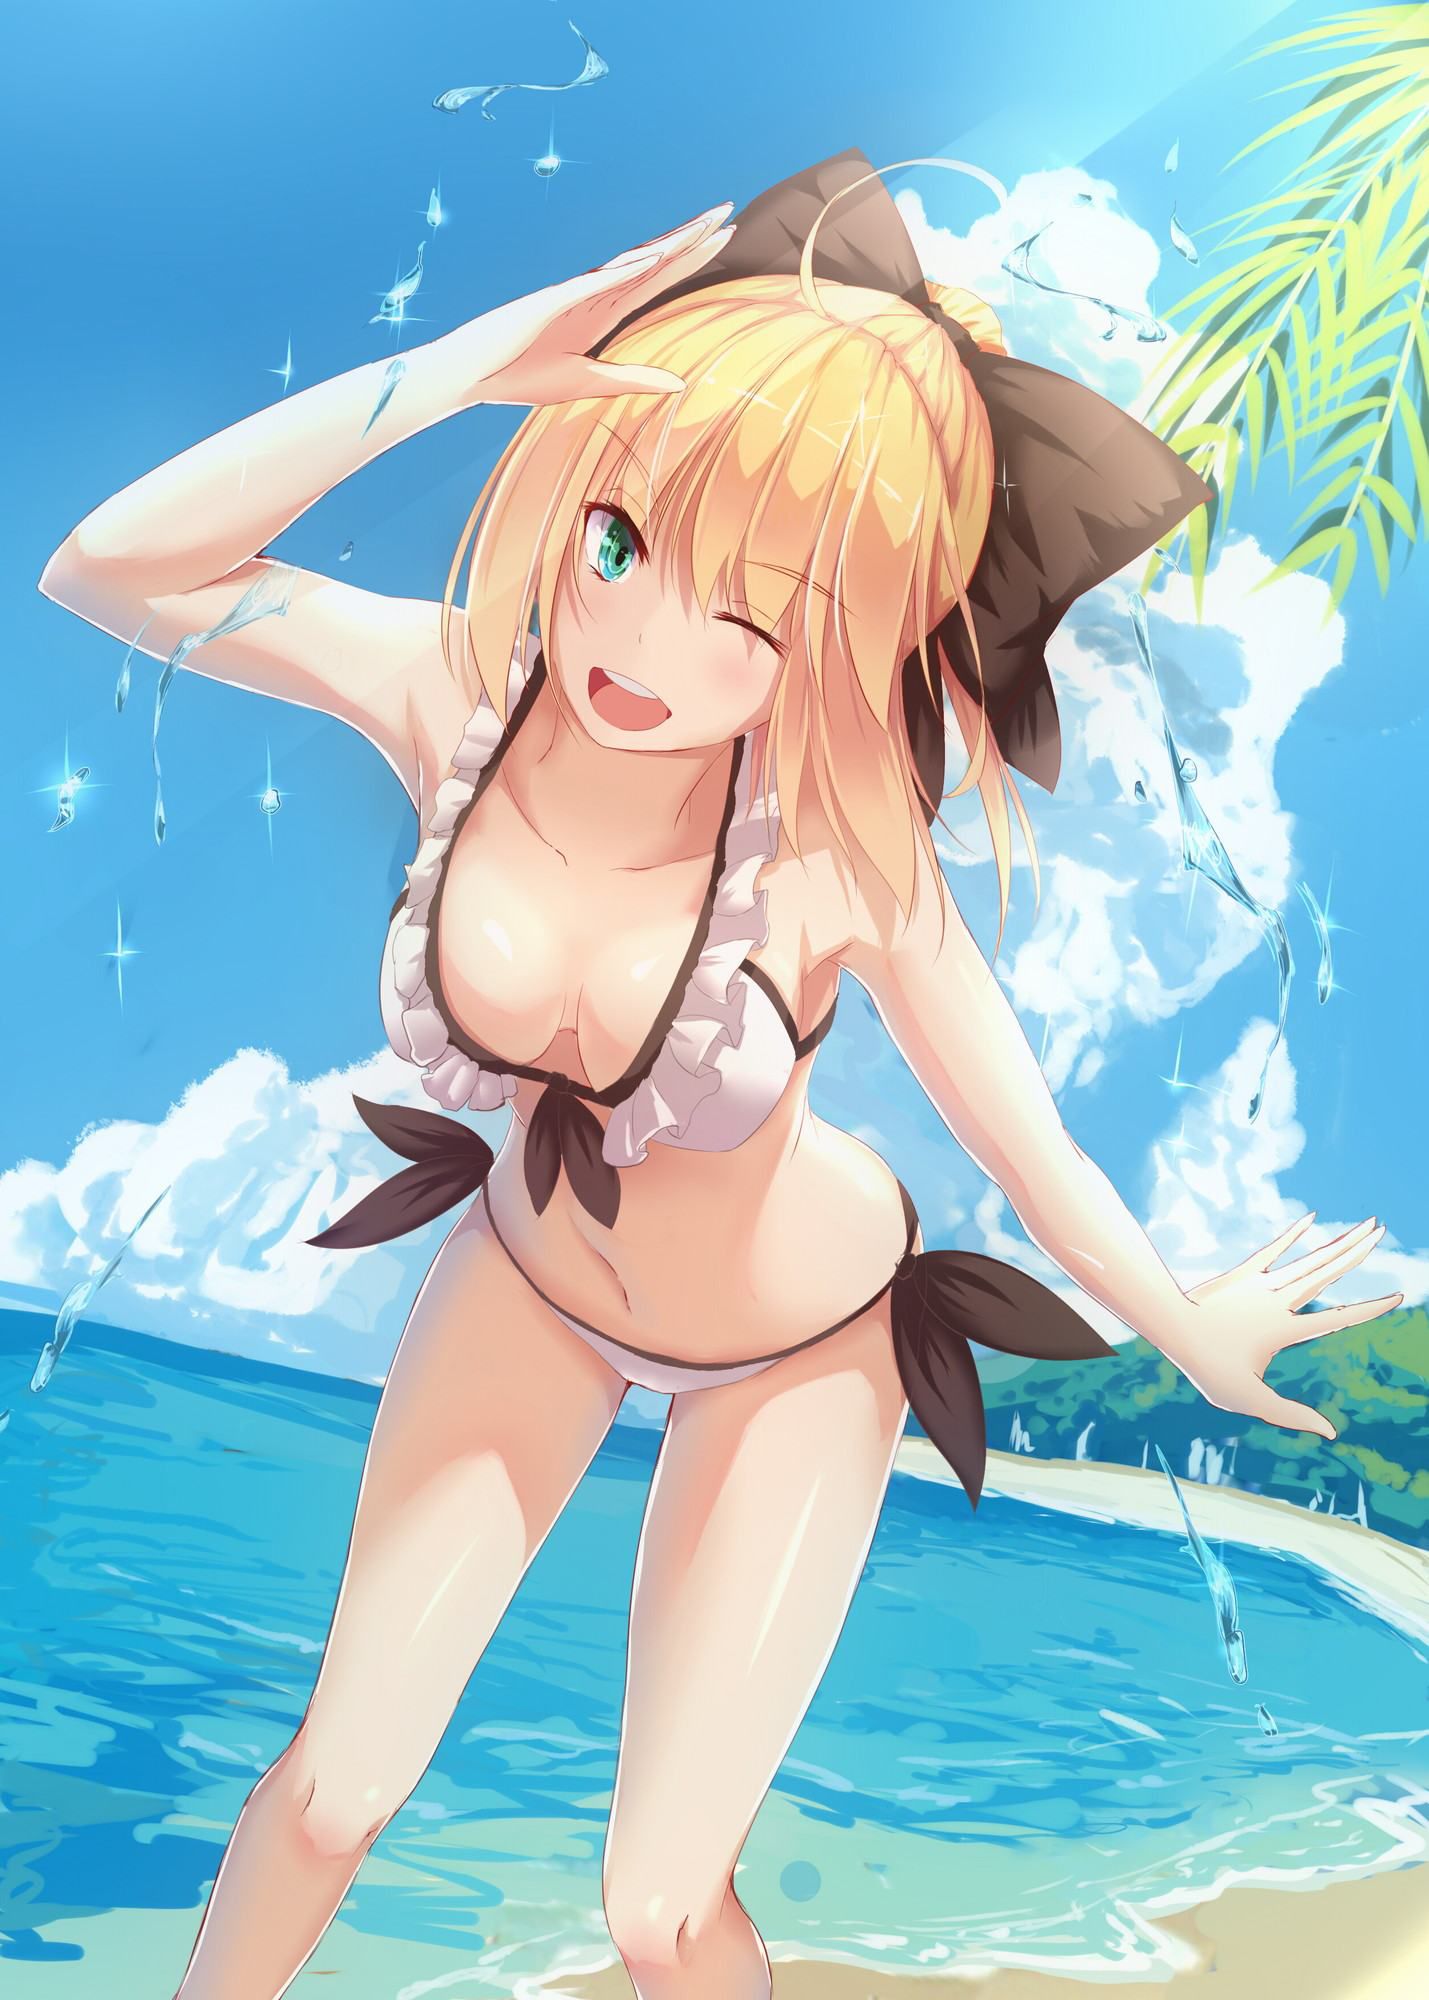 [Fate/staynight] it increases London? Saber (Altria Pendragon) MoE erotic images ☆ (8) [Fate/GrandOrder] 28